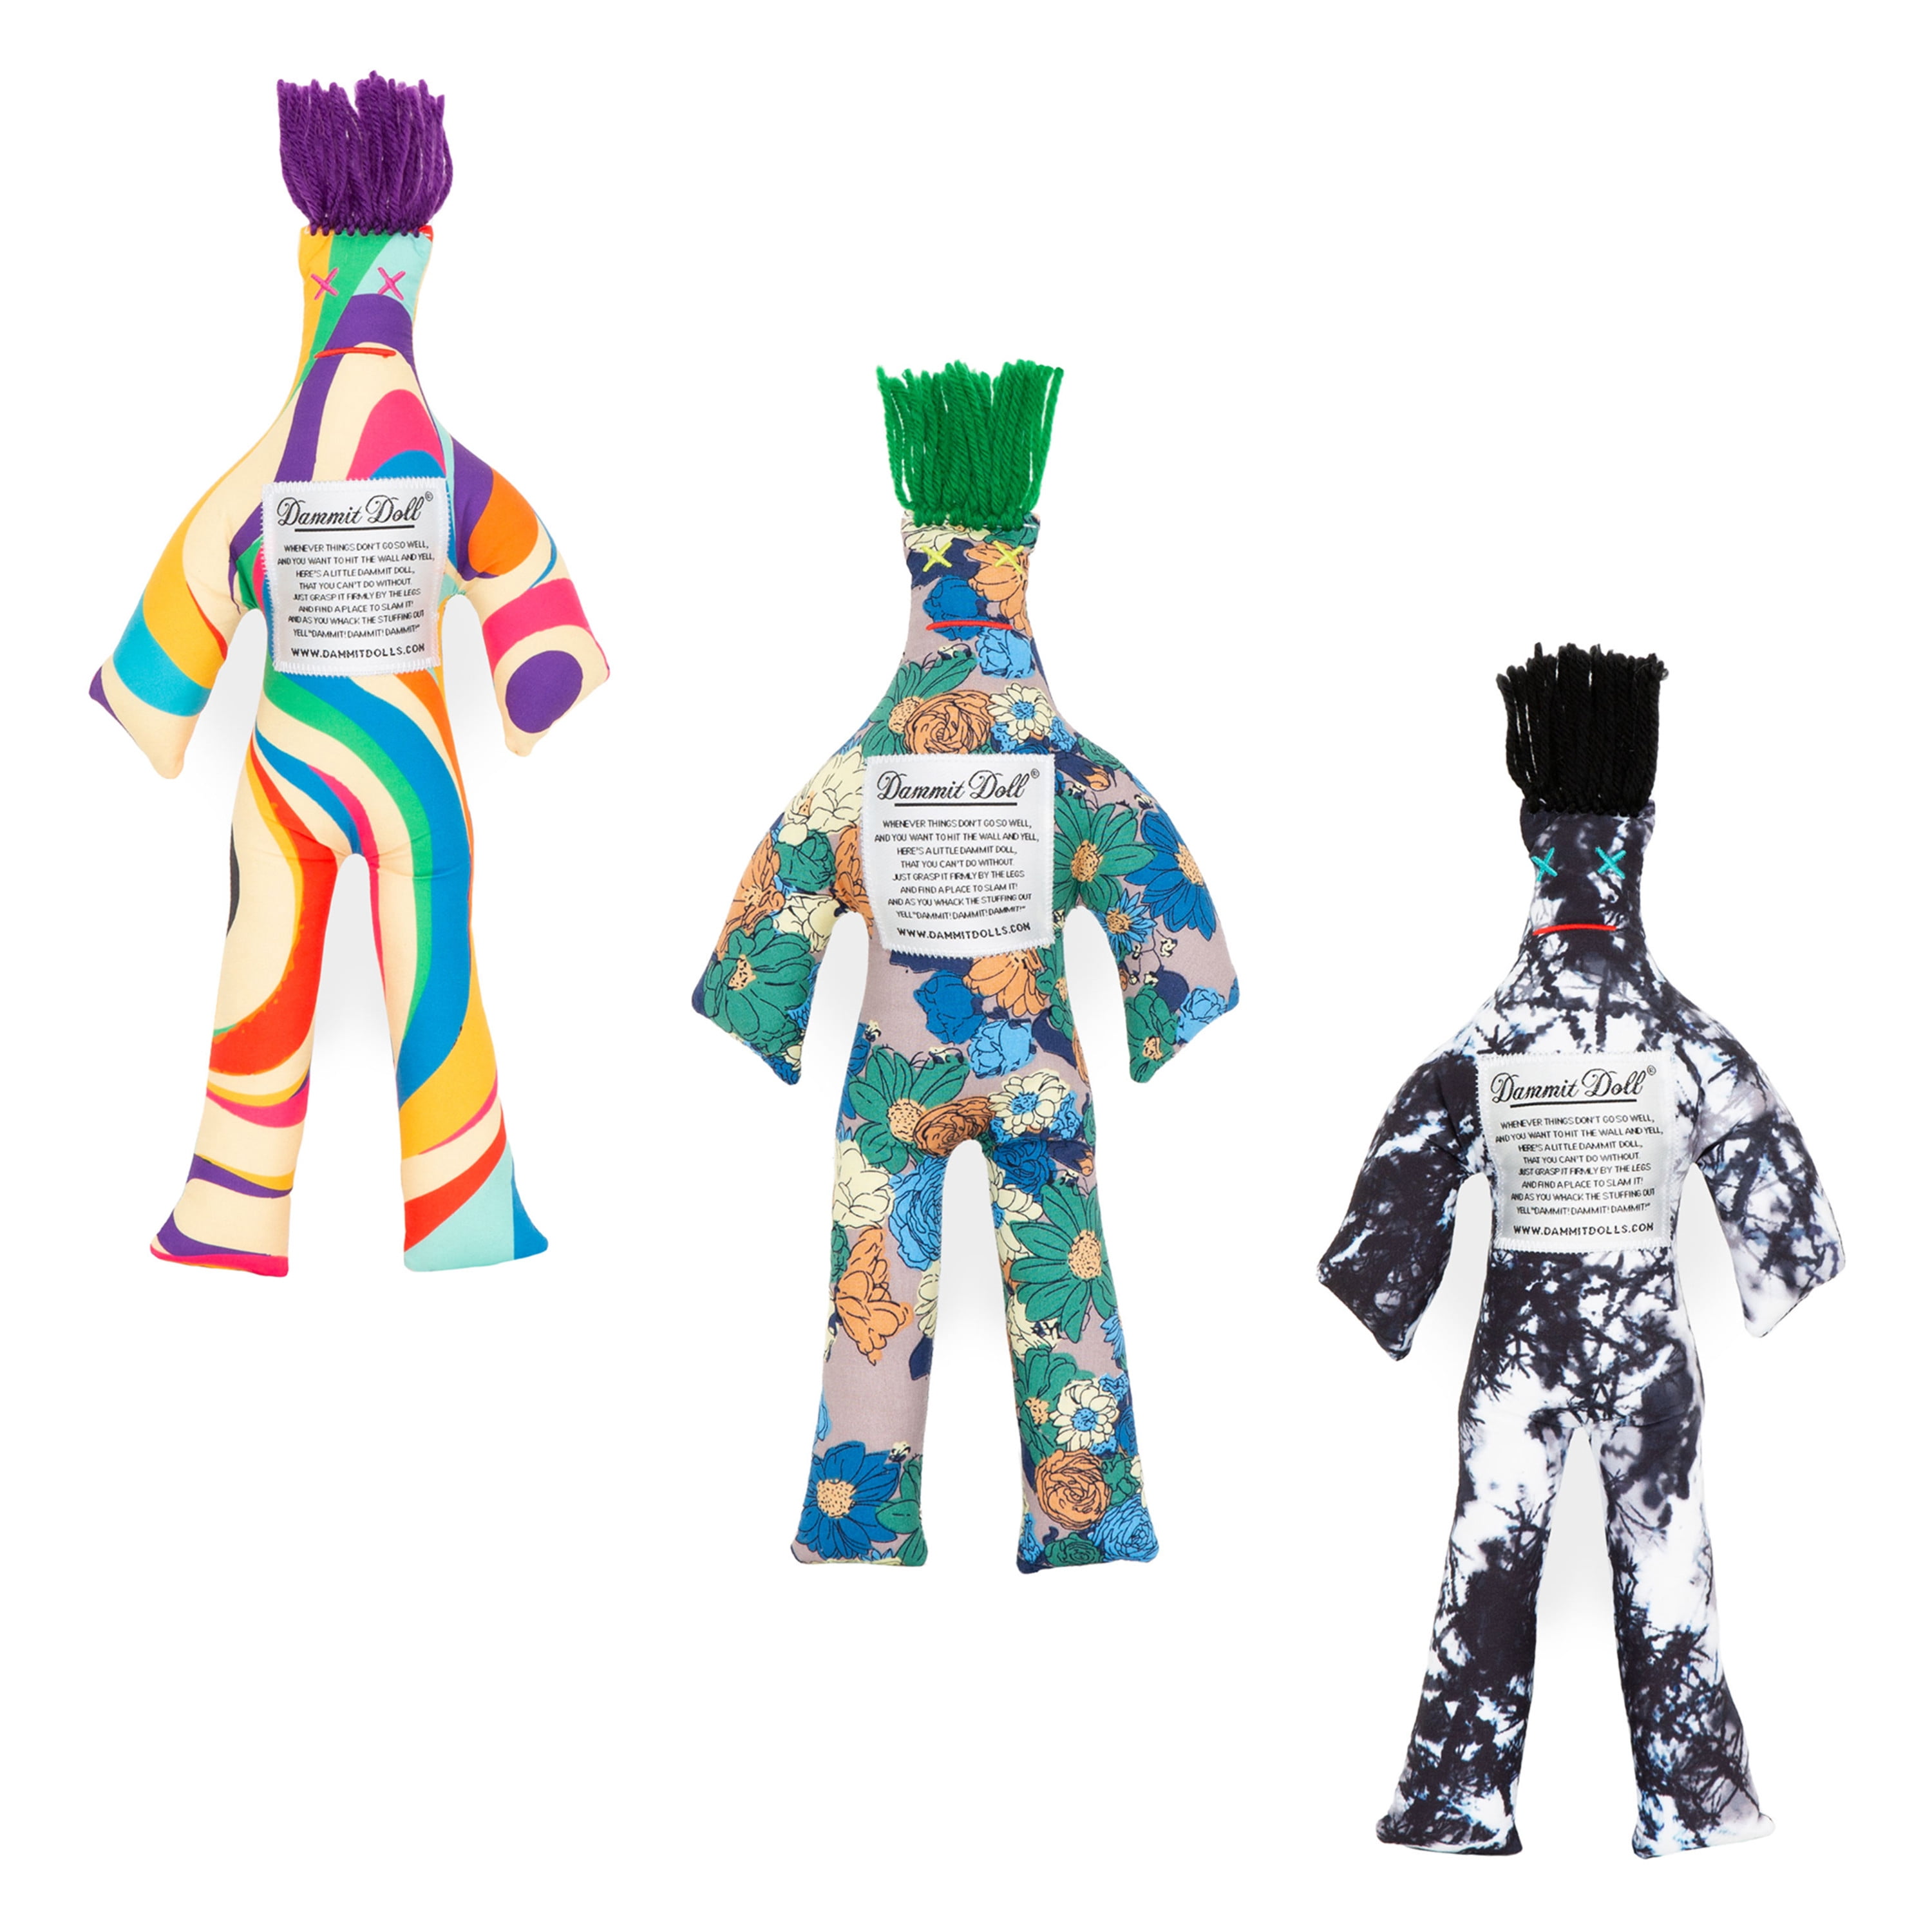 Dammit Dolls Ménage à Trois 3 pack Dammit Doll Stress Relief Toy, Gag Gifts